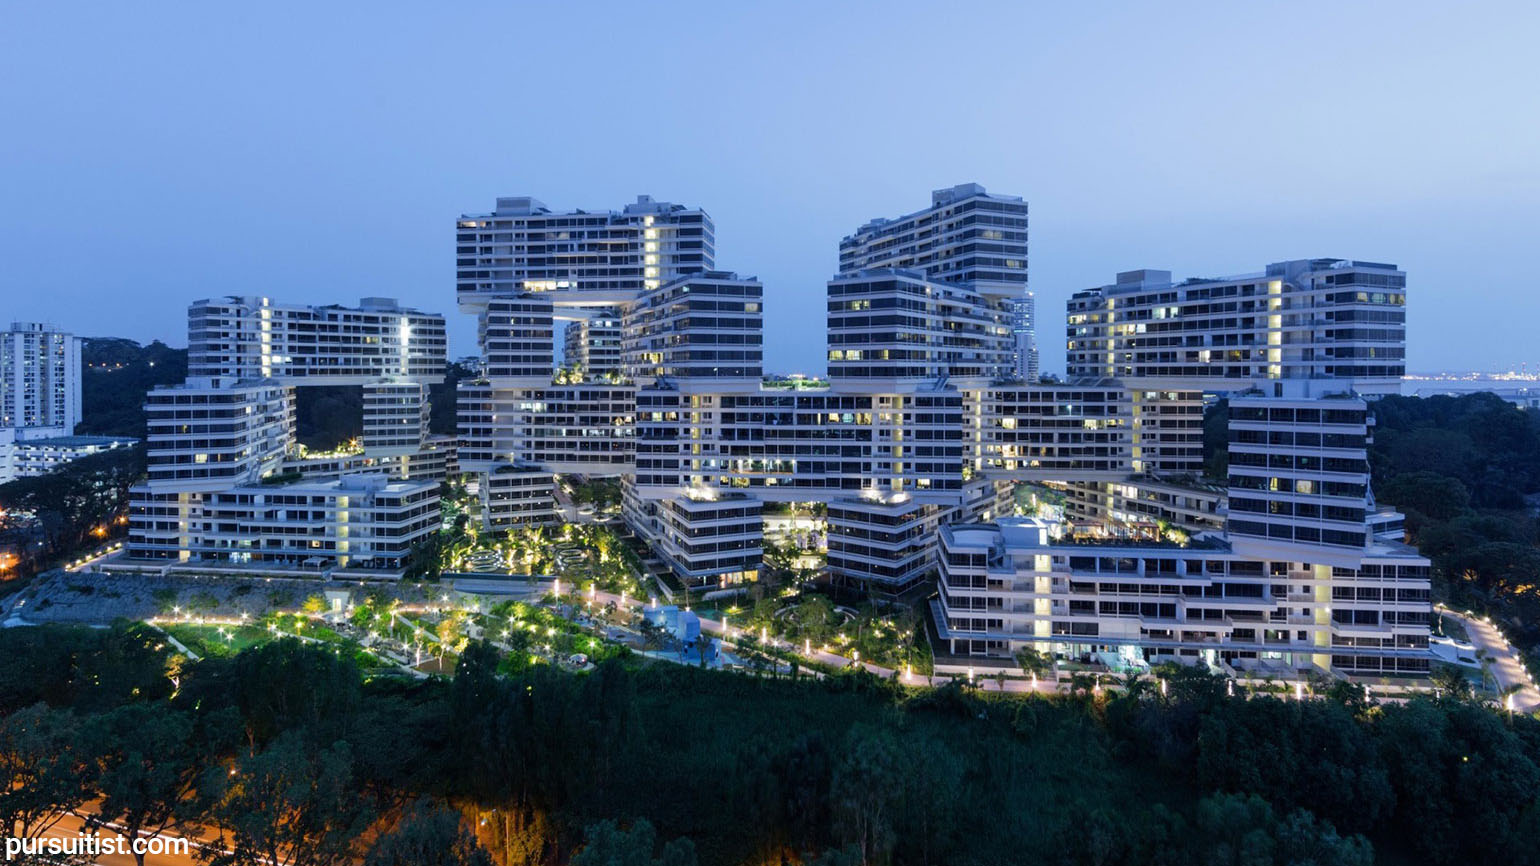 The Interlace - World Building of the Year!